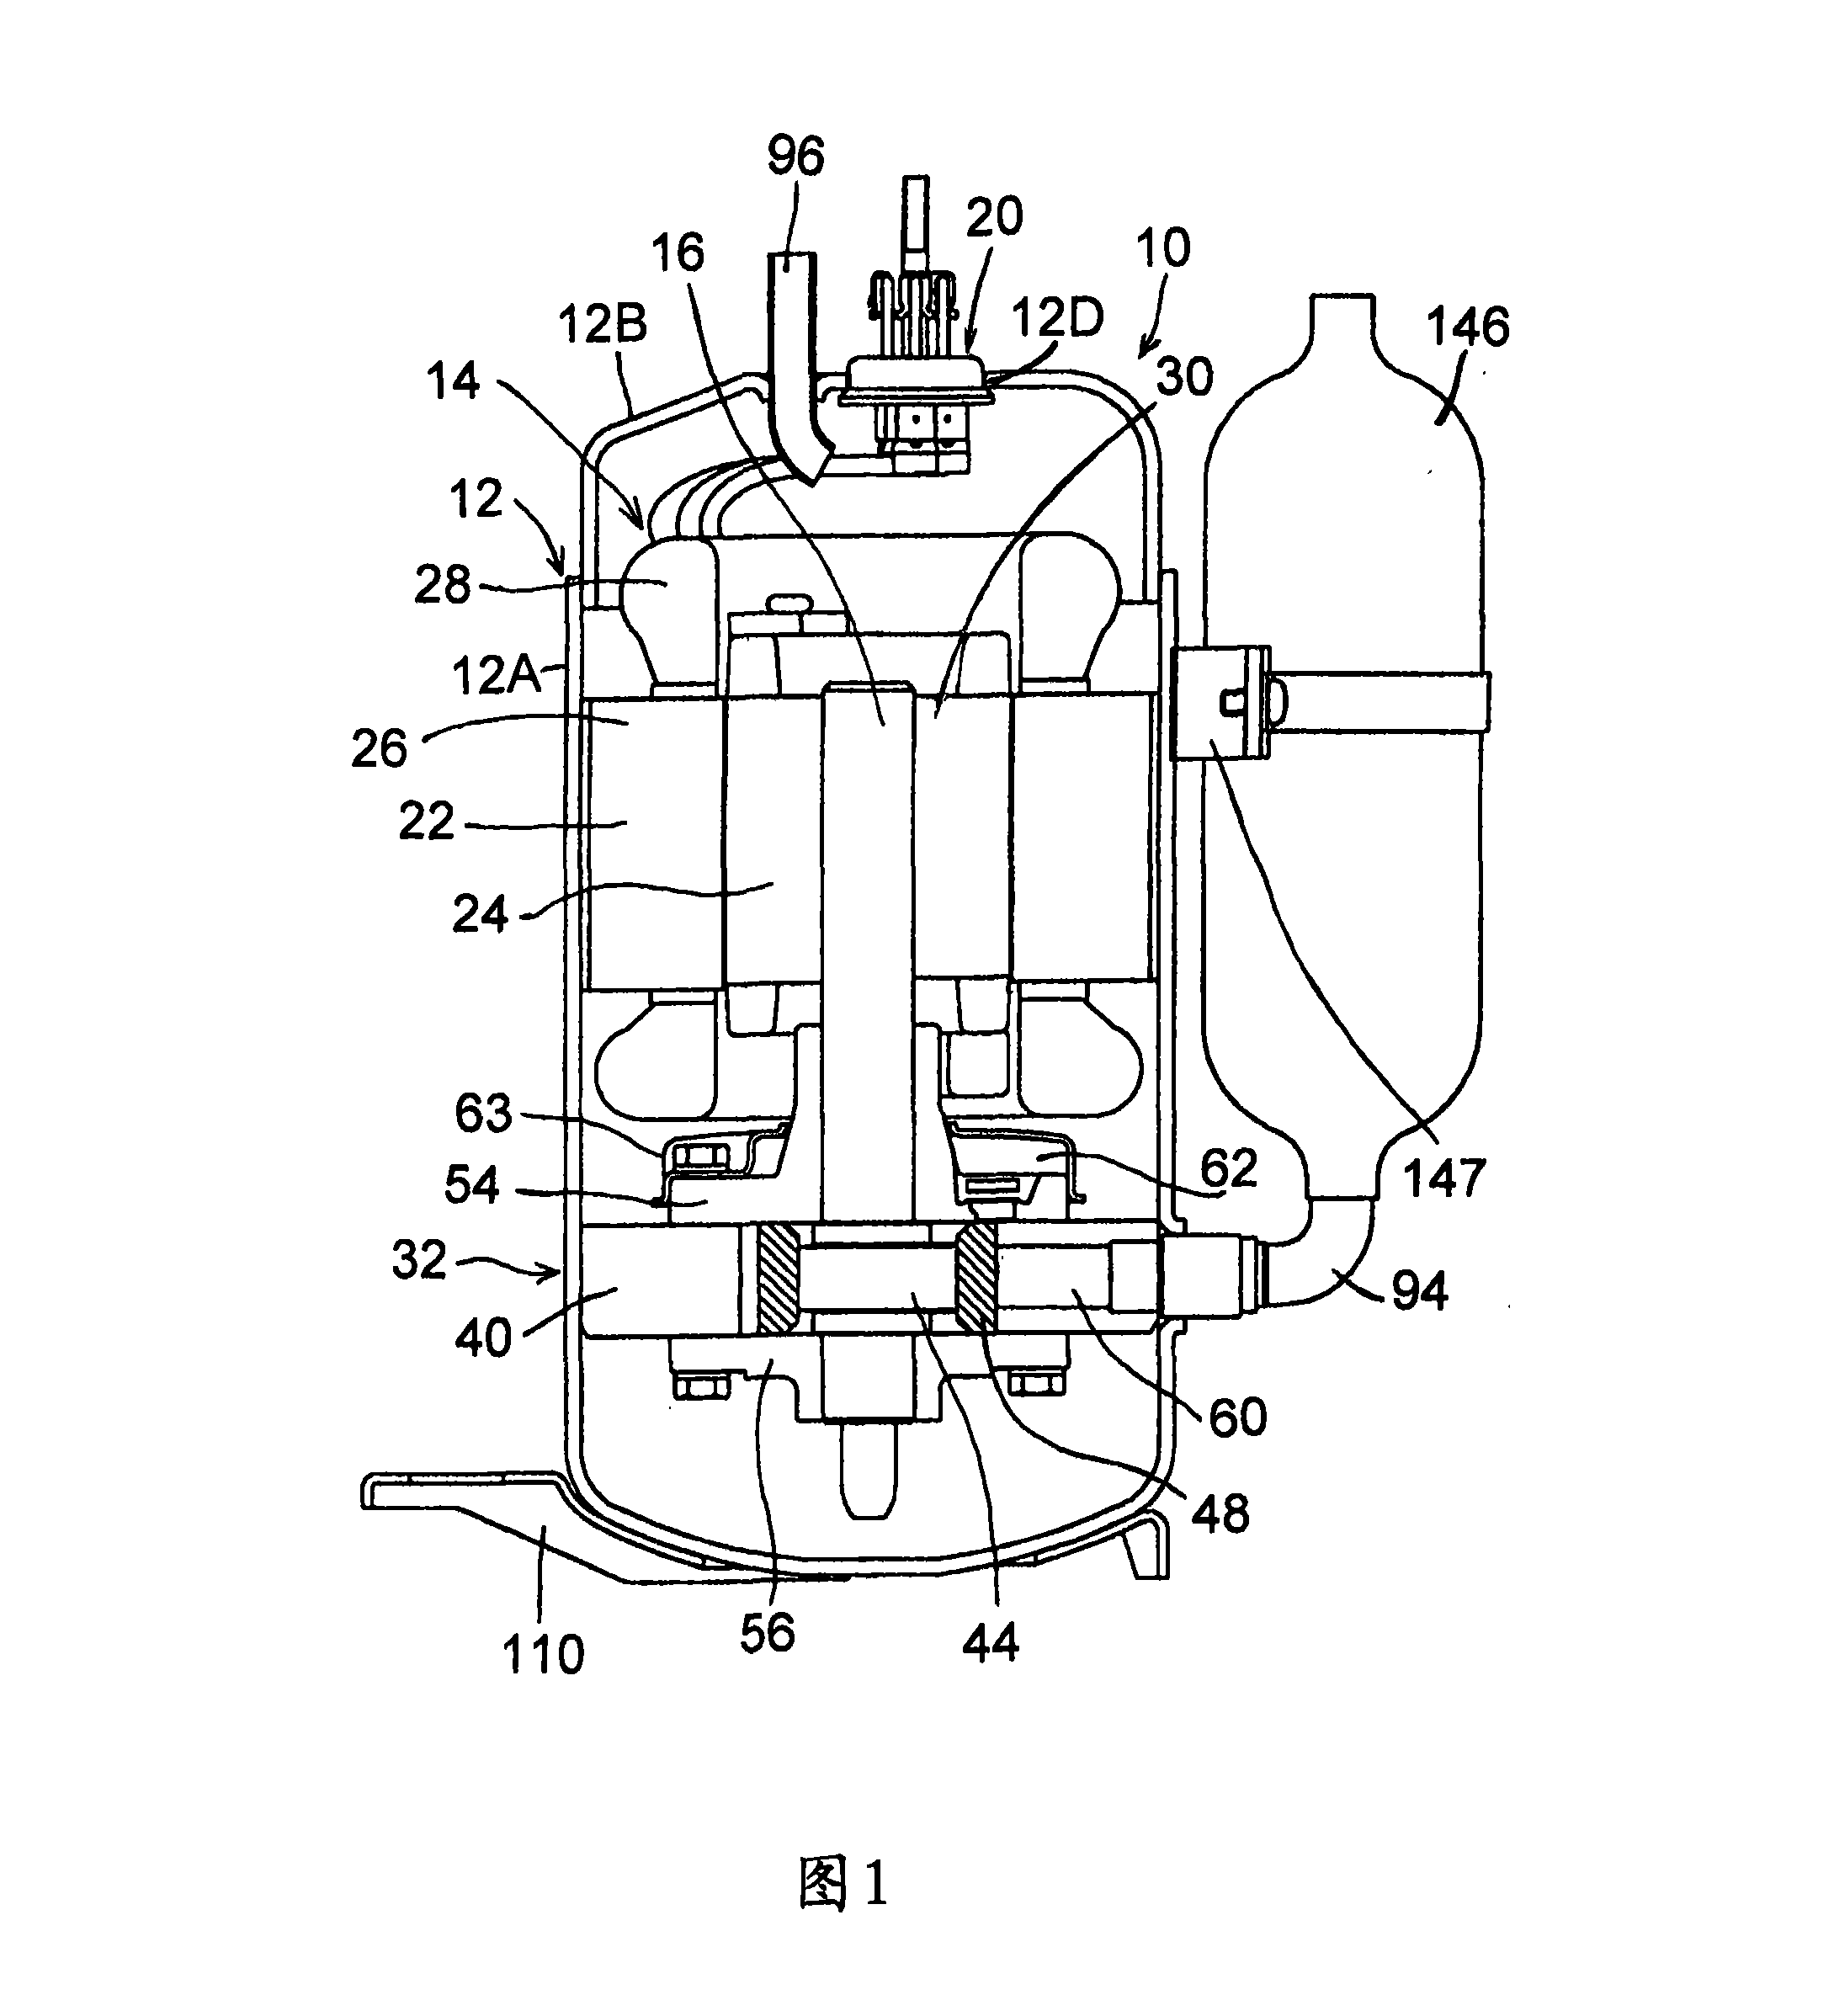 Method for manufacturing rotary compressor